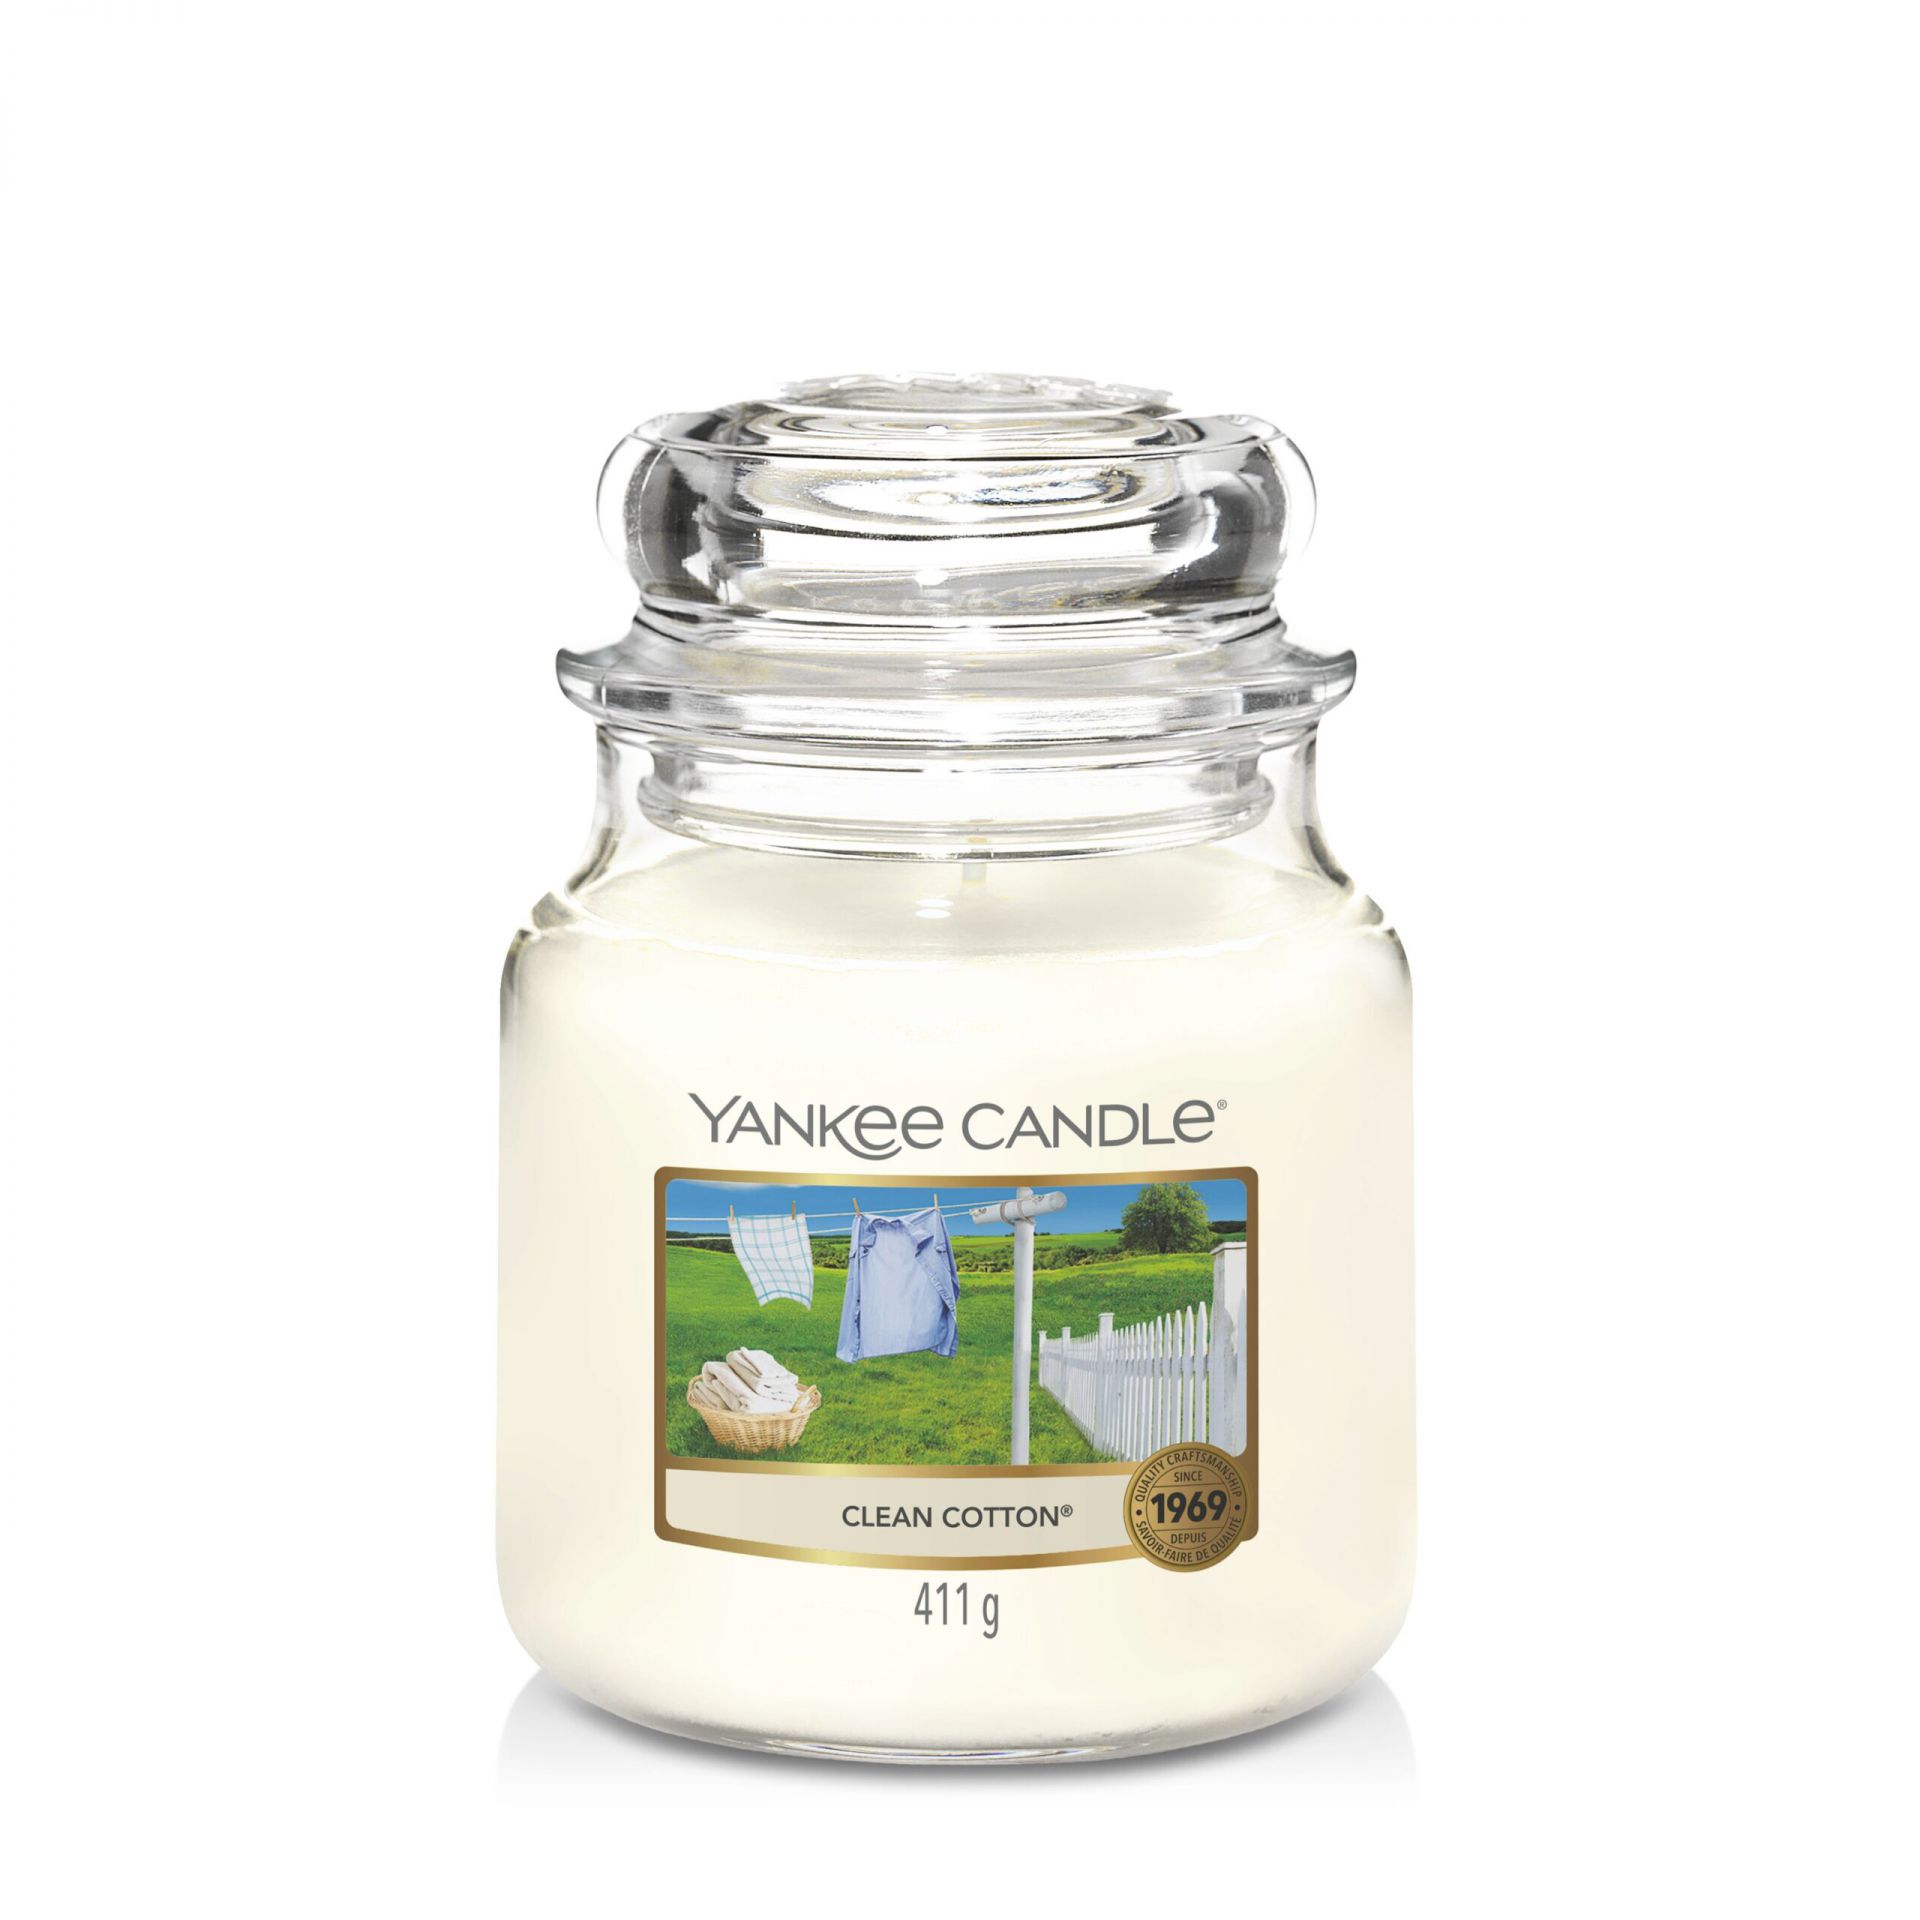 YANKEE CANDLE CLEAN COTTON 411G